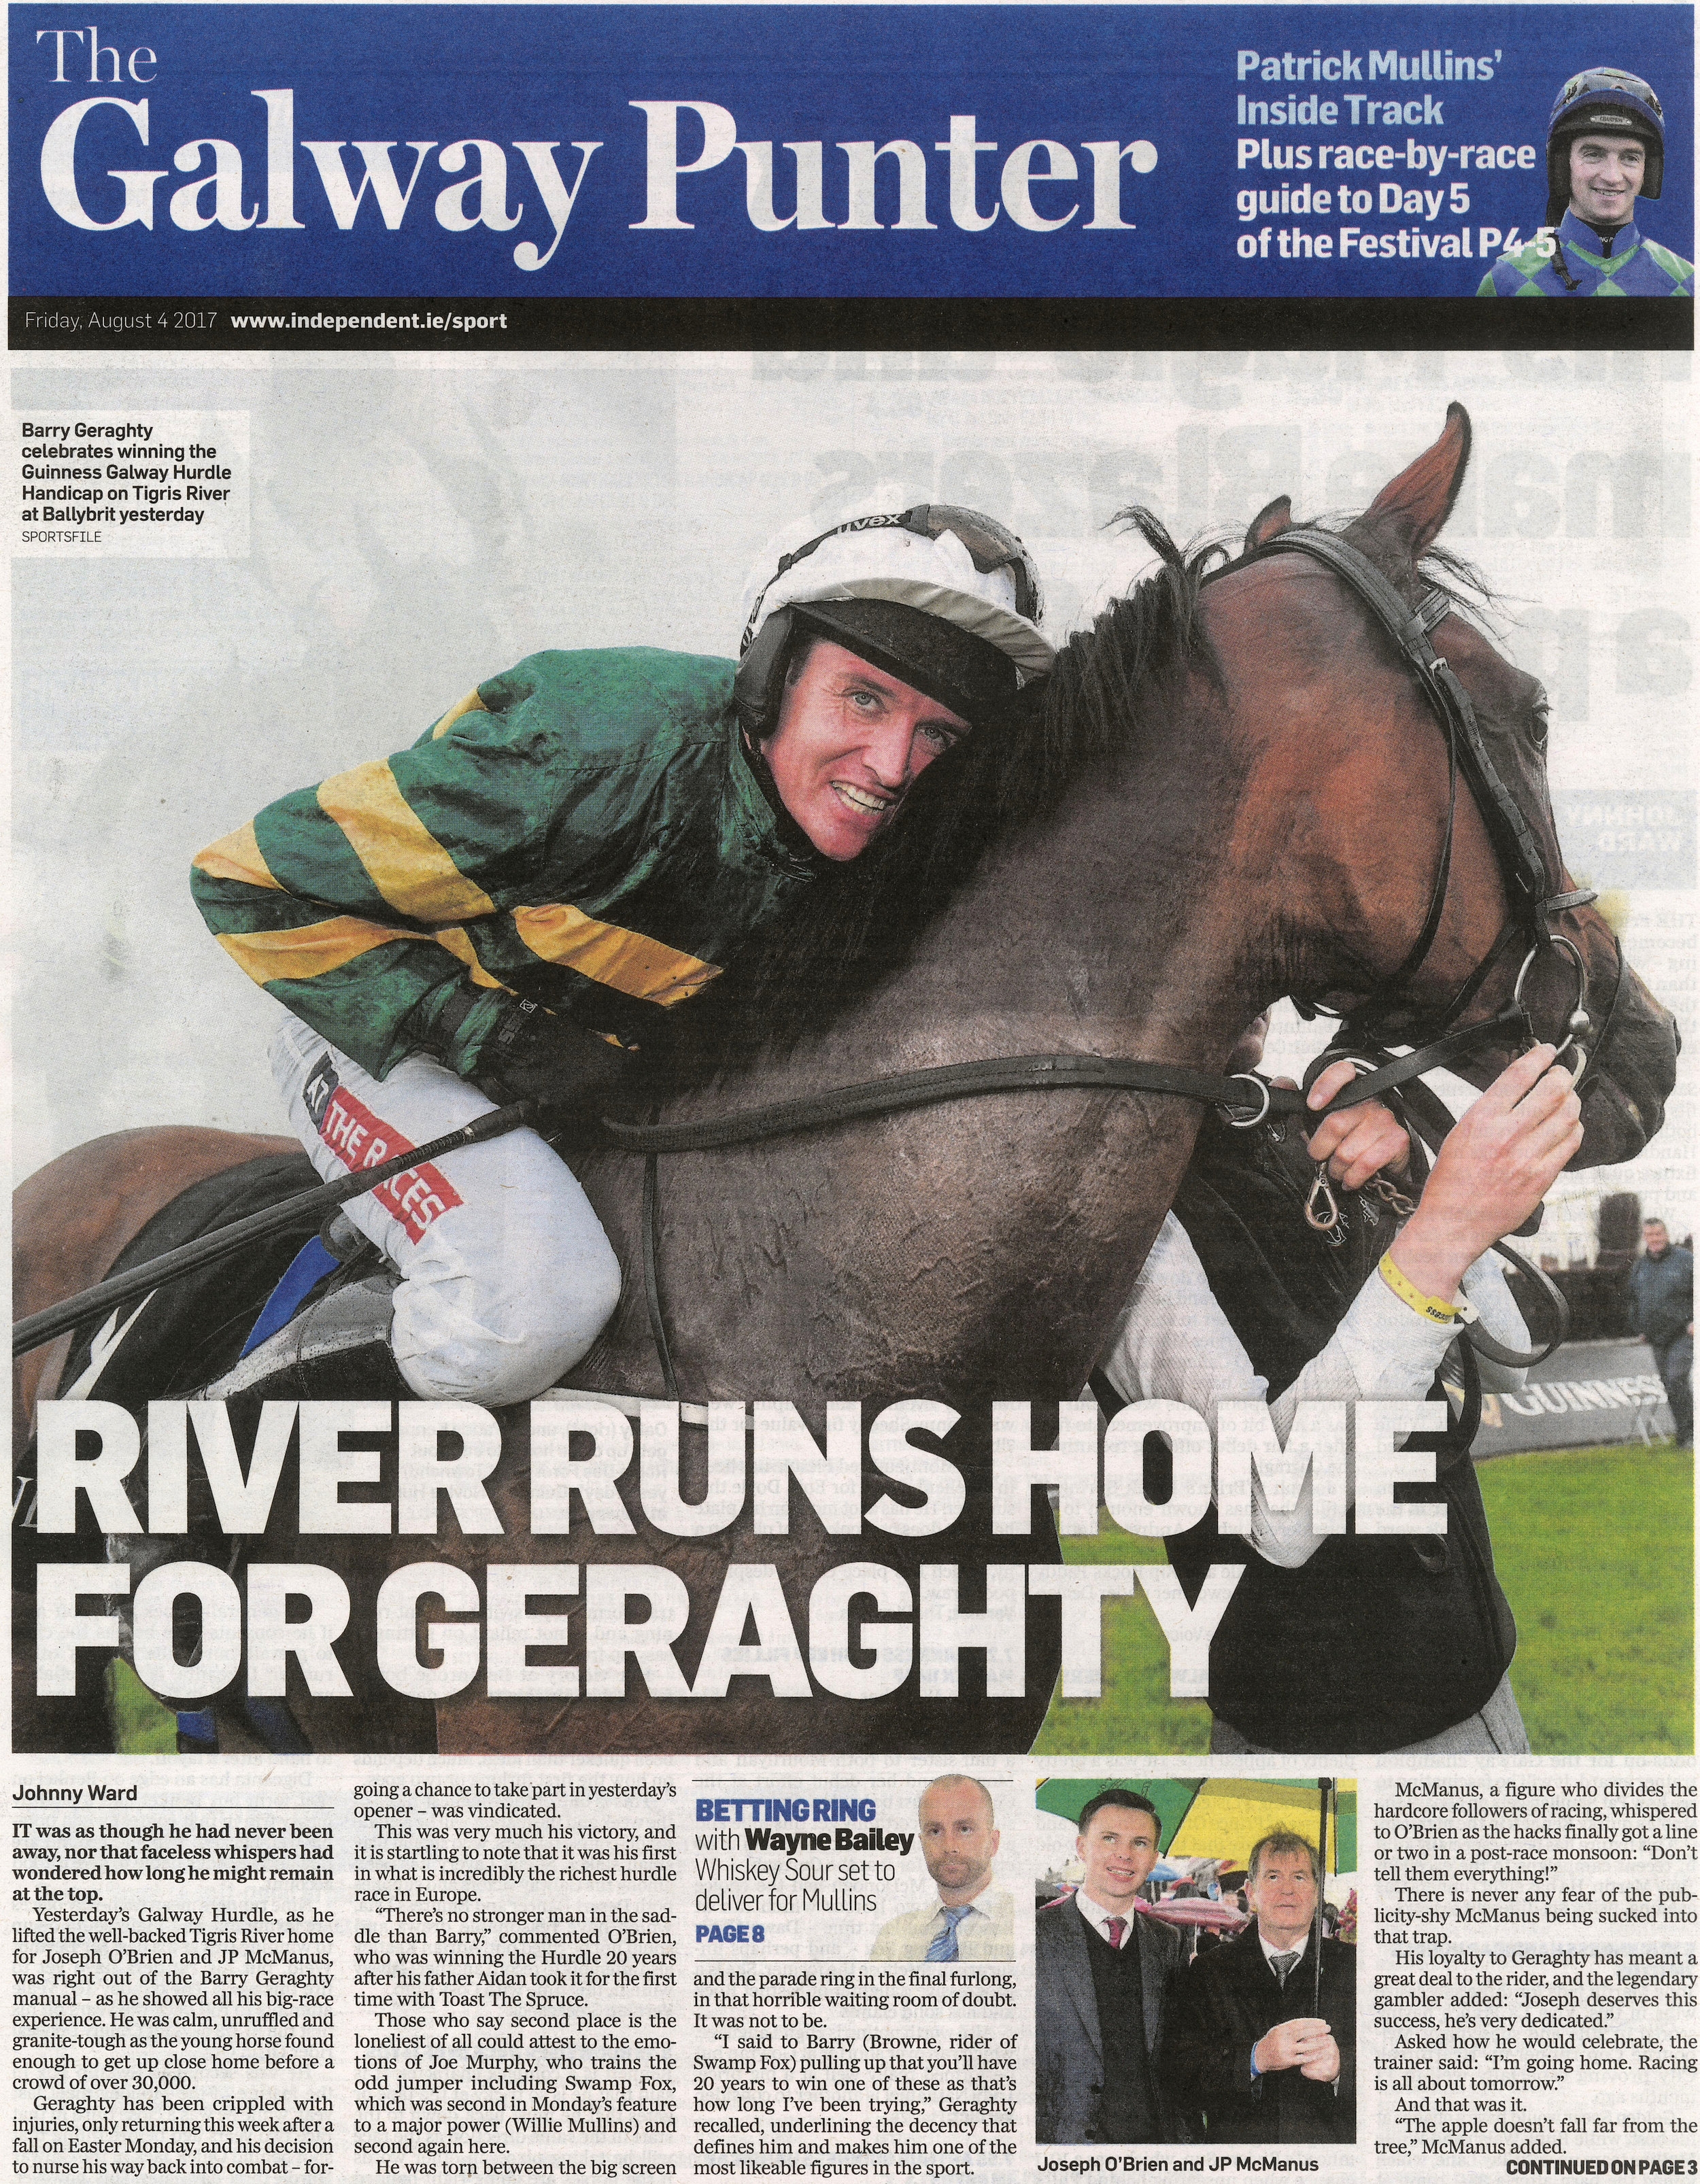  Barry Geraghty celebrates after winning the Galway Hurdle on Tigris River at Galway Festival August 4 2017  Irish Independent  